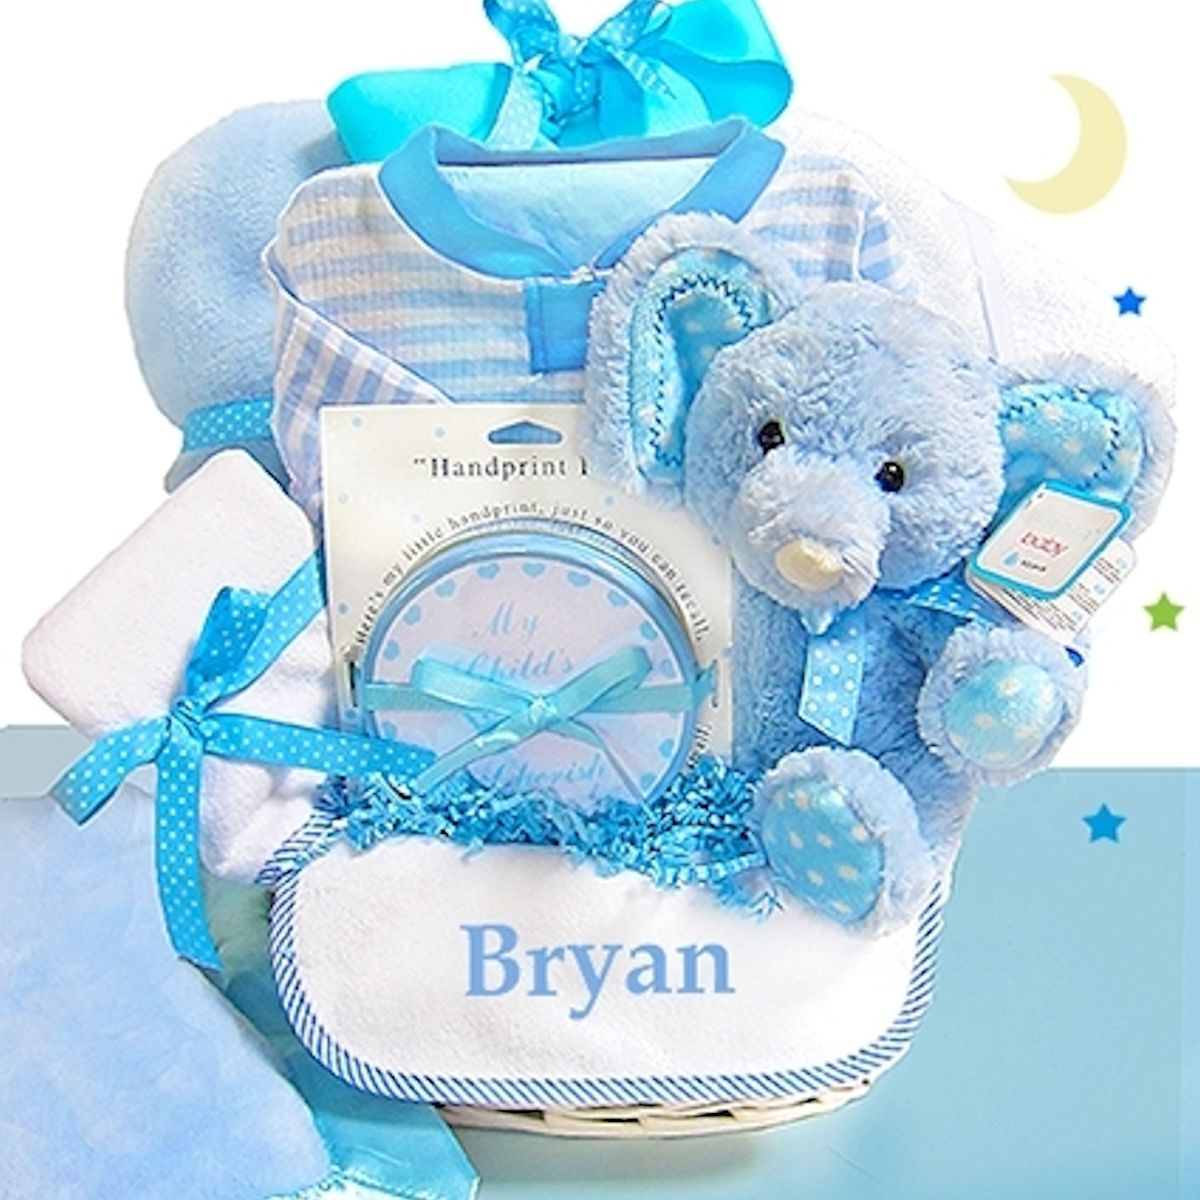 21 Of the Best Ideas for Personalized Gifts for Baby Boy Home, Family